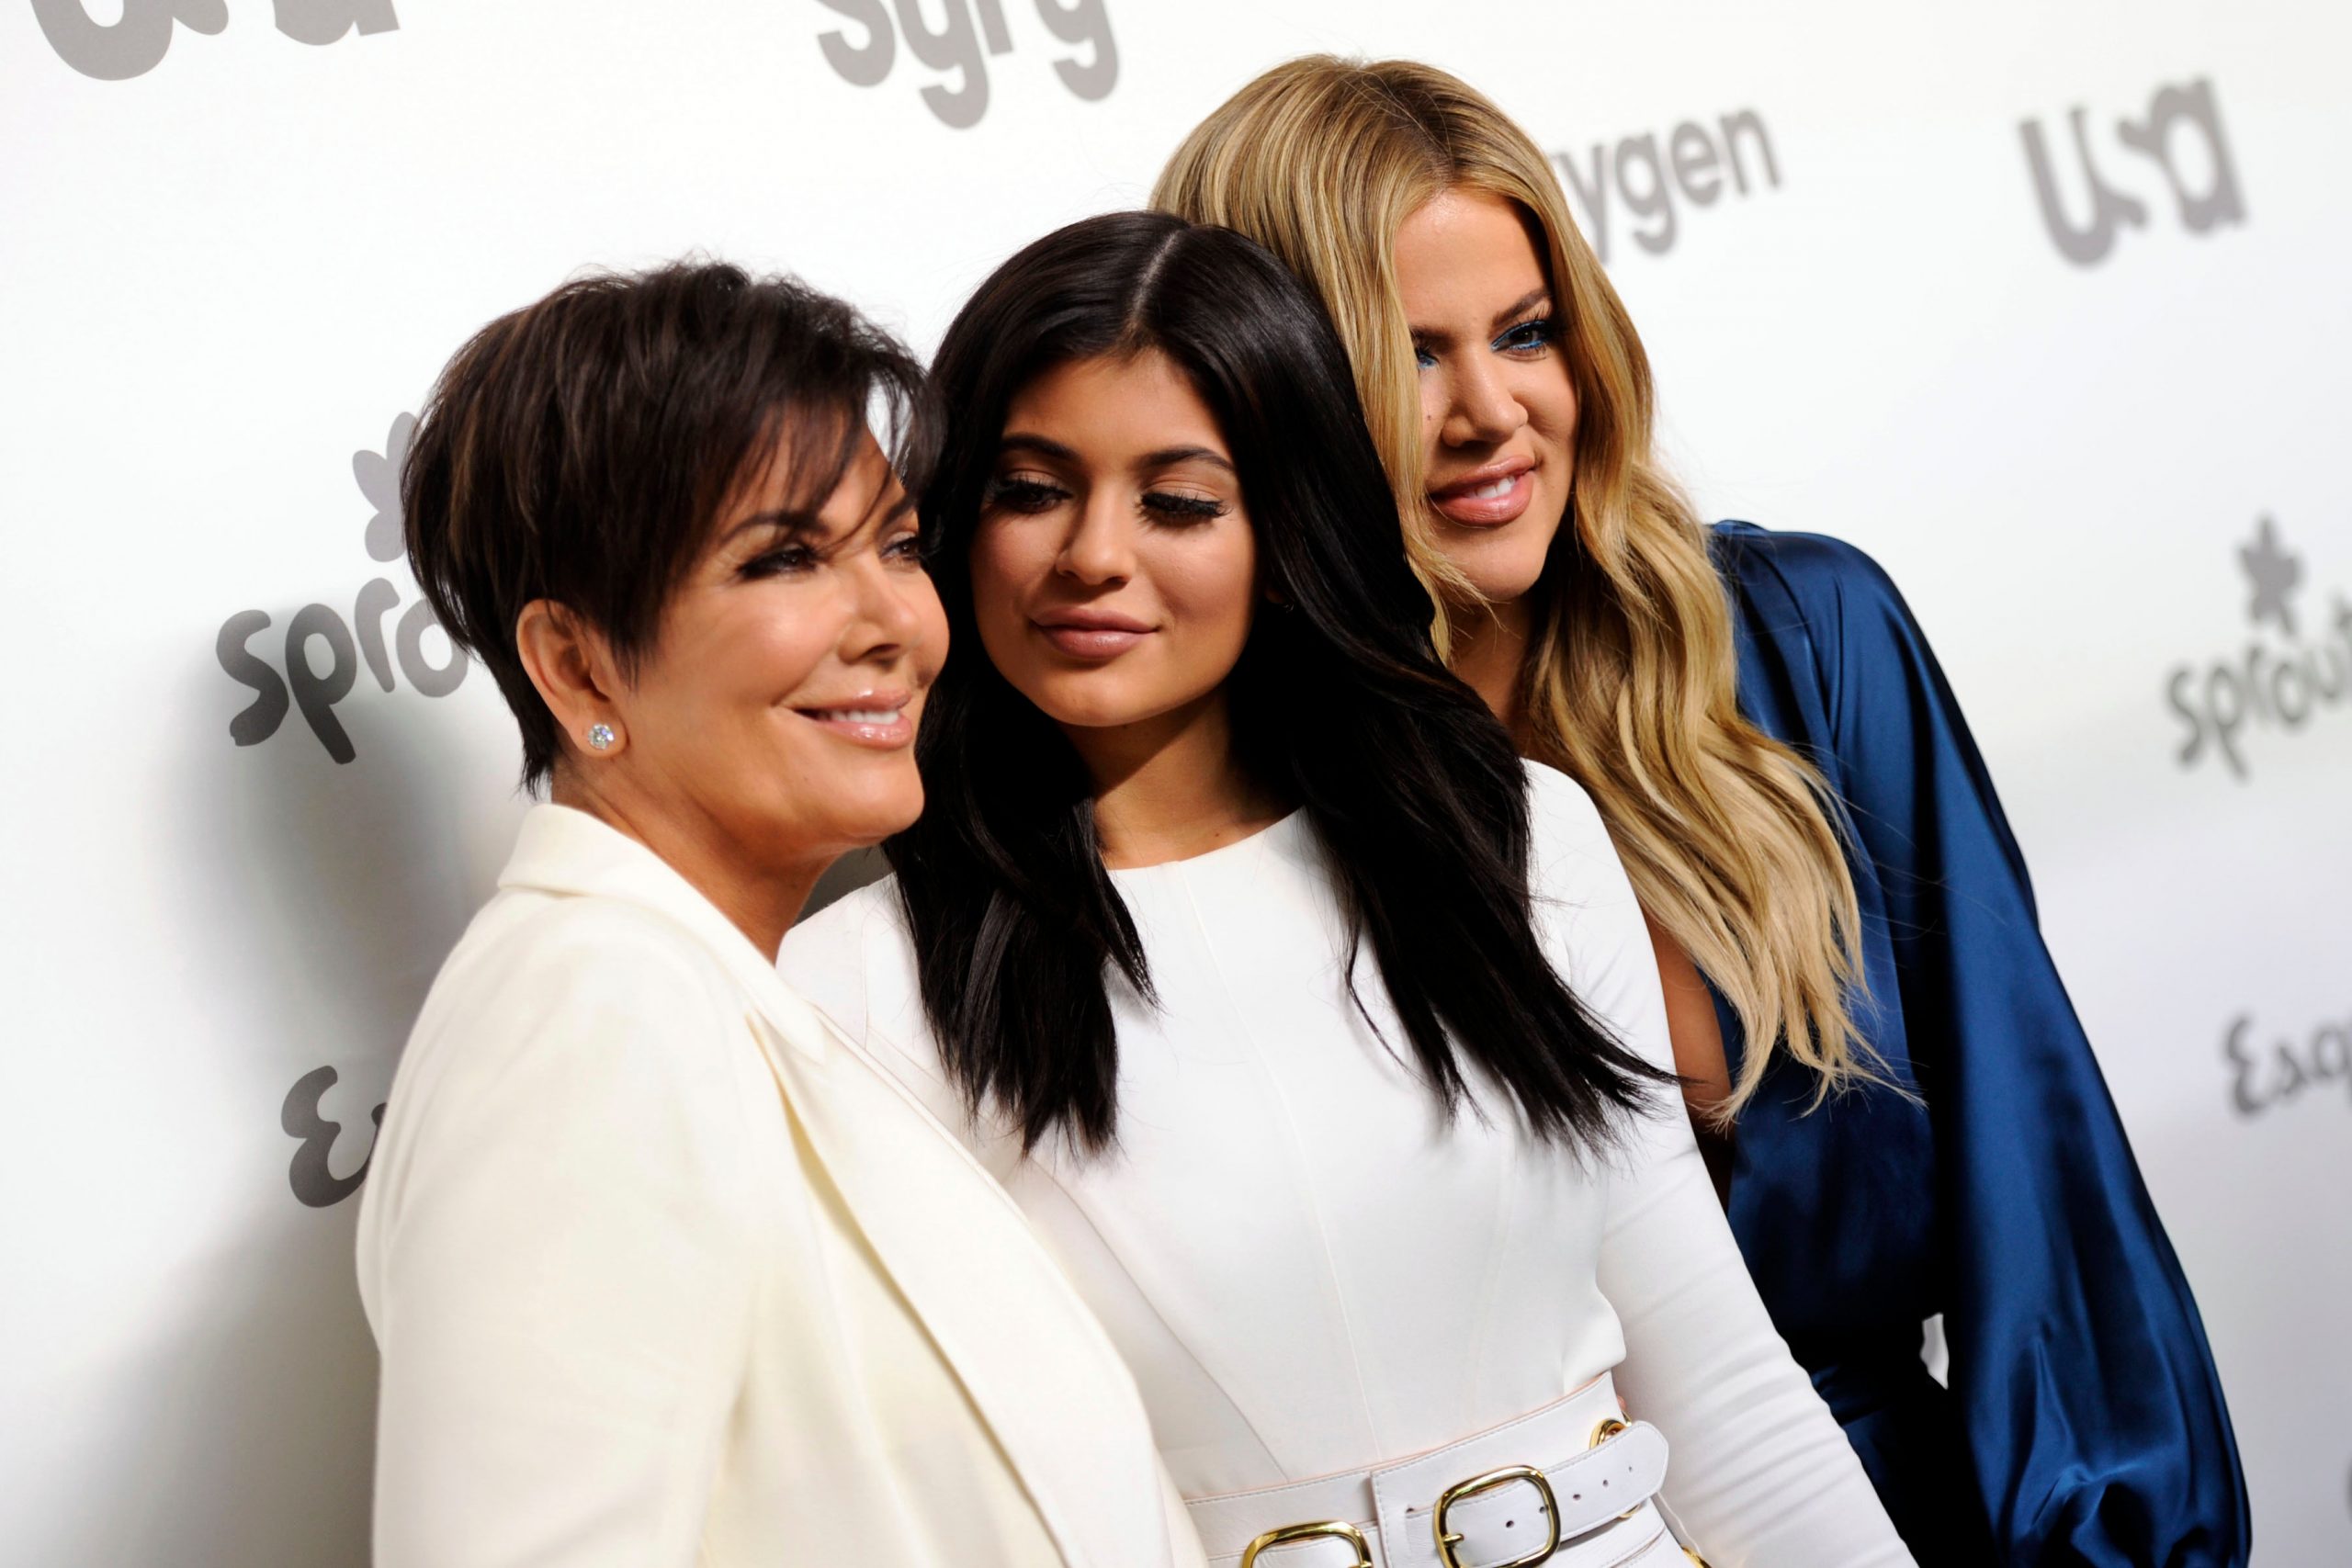 Met Gala 2022: All Kardashians have been invited but some may not show up